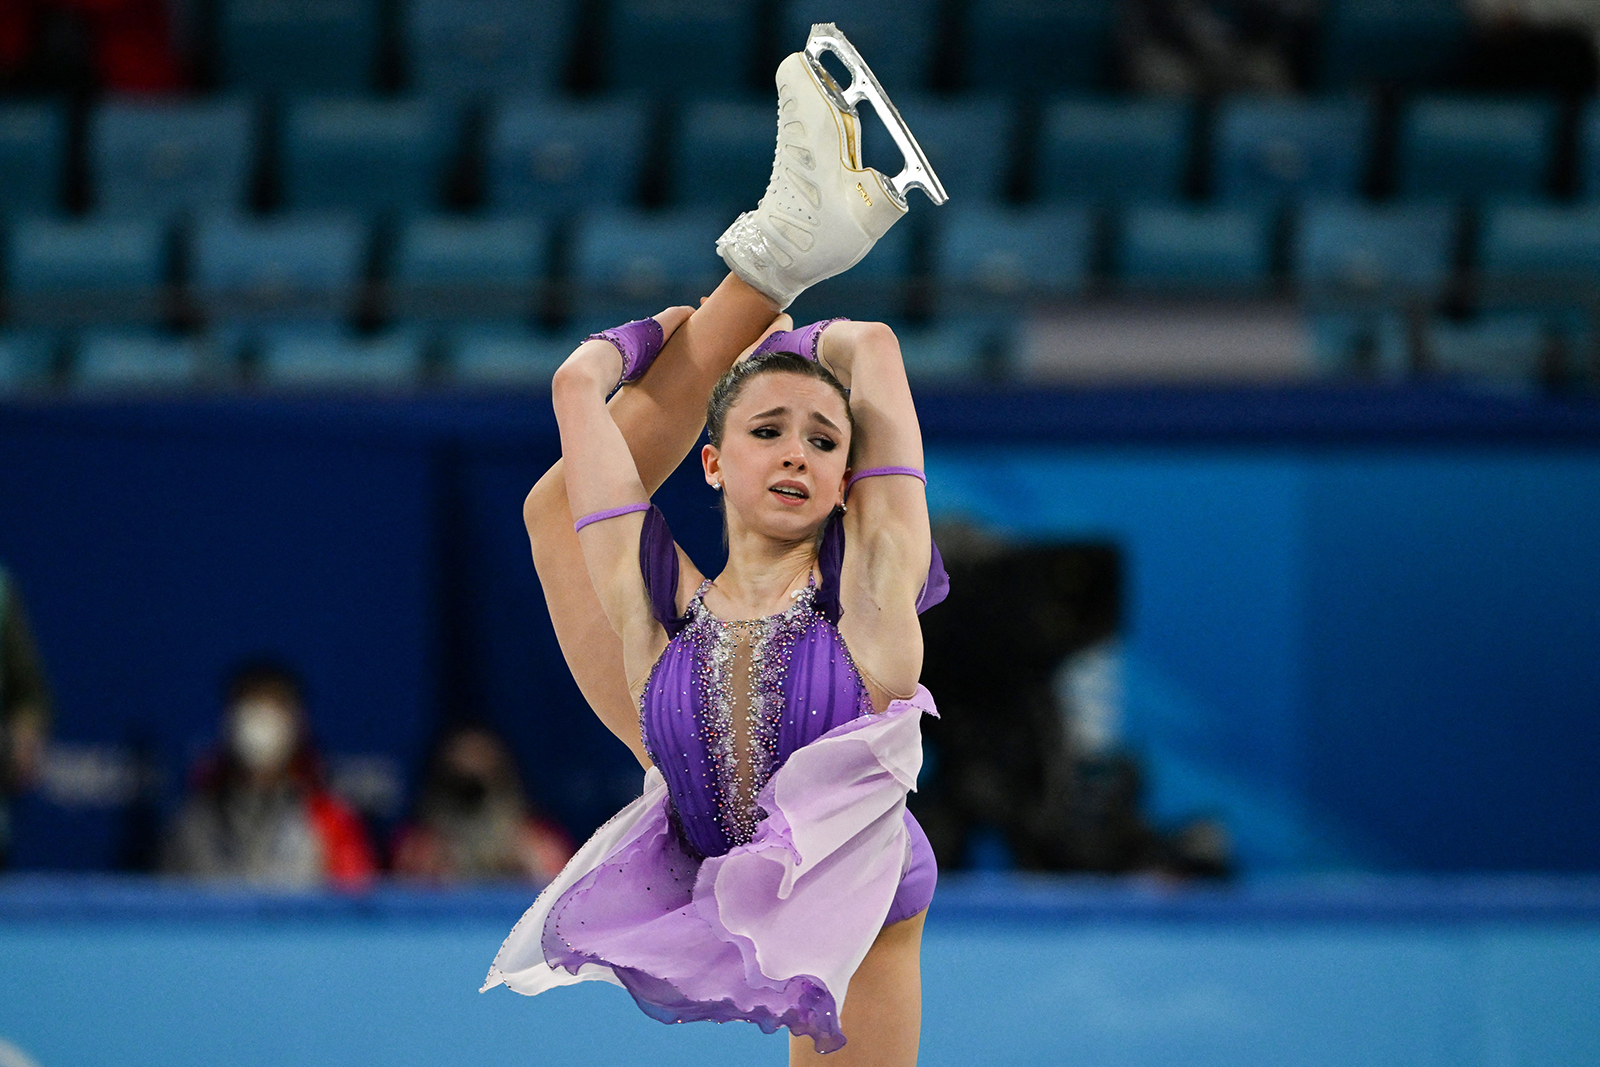 Russia's Kamila Valieva competes in the women's single skating short program of the figure skating team event on Sunday.